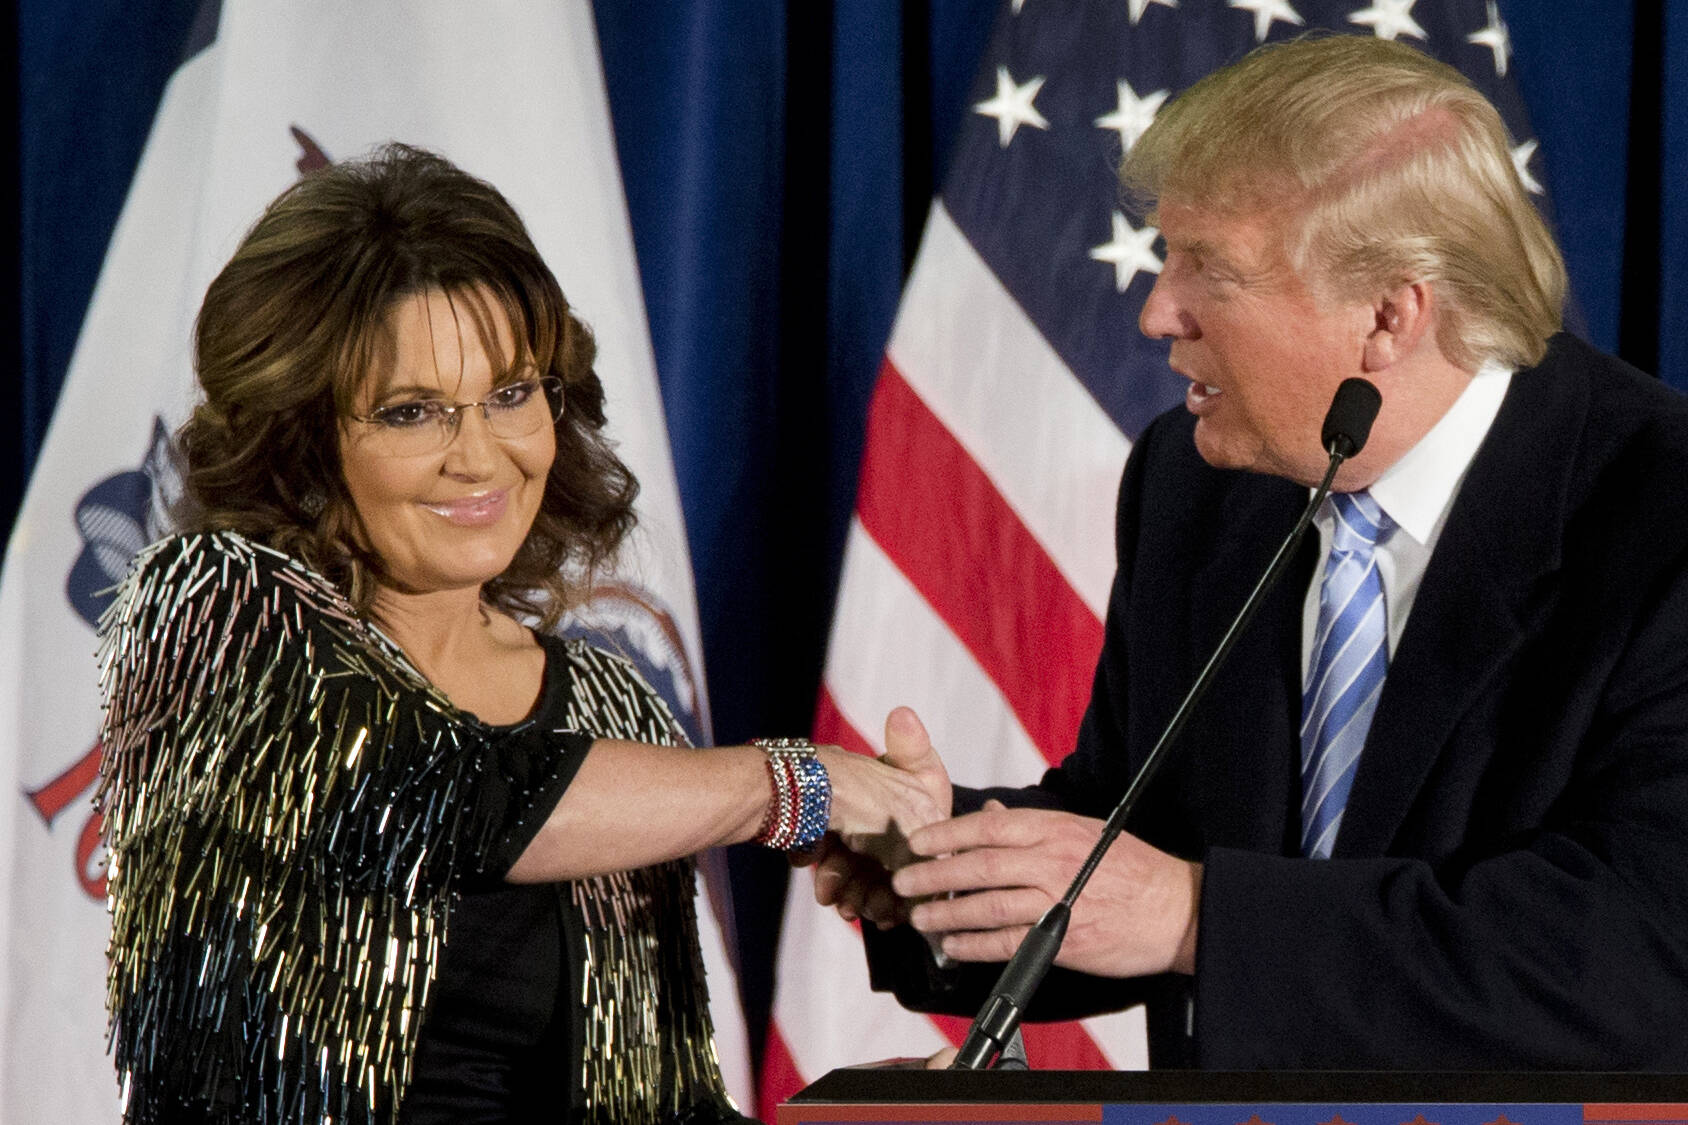 Former Alaska Gov. Sarah Palin, left, appears with then-Republican presidential candidate Donald Trump at a rally at the Iowa State University on Jan. 19, 2016, in Ames, Iowa. Former Alaska Gov. Sarah Palin has picked up a prized endorsement in her bid in an extremely crowded field to fill the unexpired term of the late U.S. Rep. Don Young. Former President Donald Trump backed Palin on Sunday, April 3, 2022, in a statement from his political action committee. (AP Photo / Mary Altaffer)